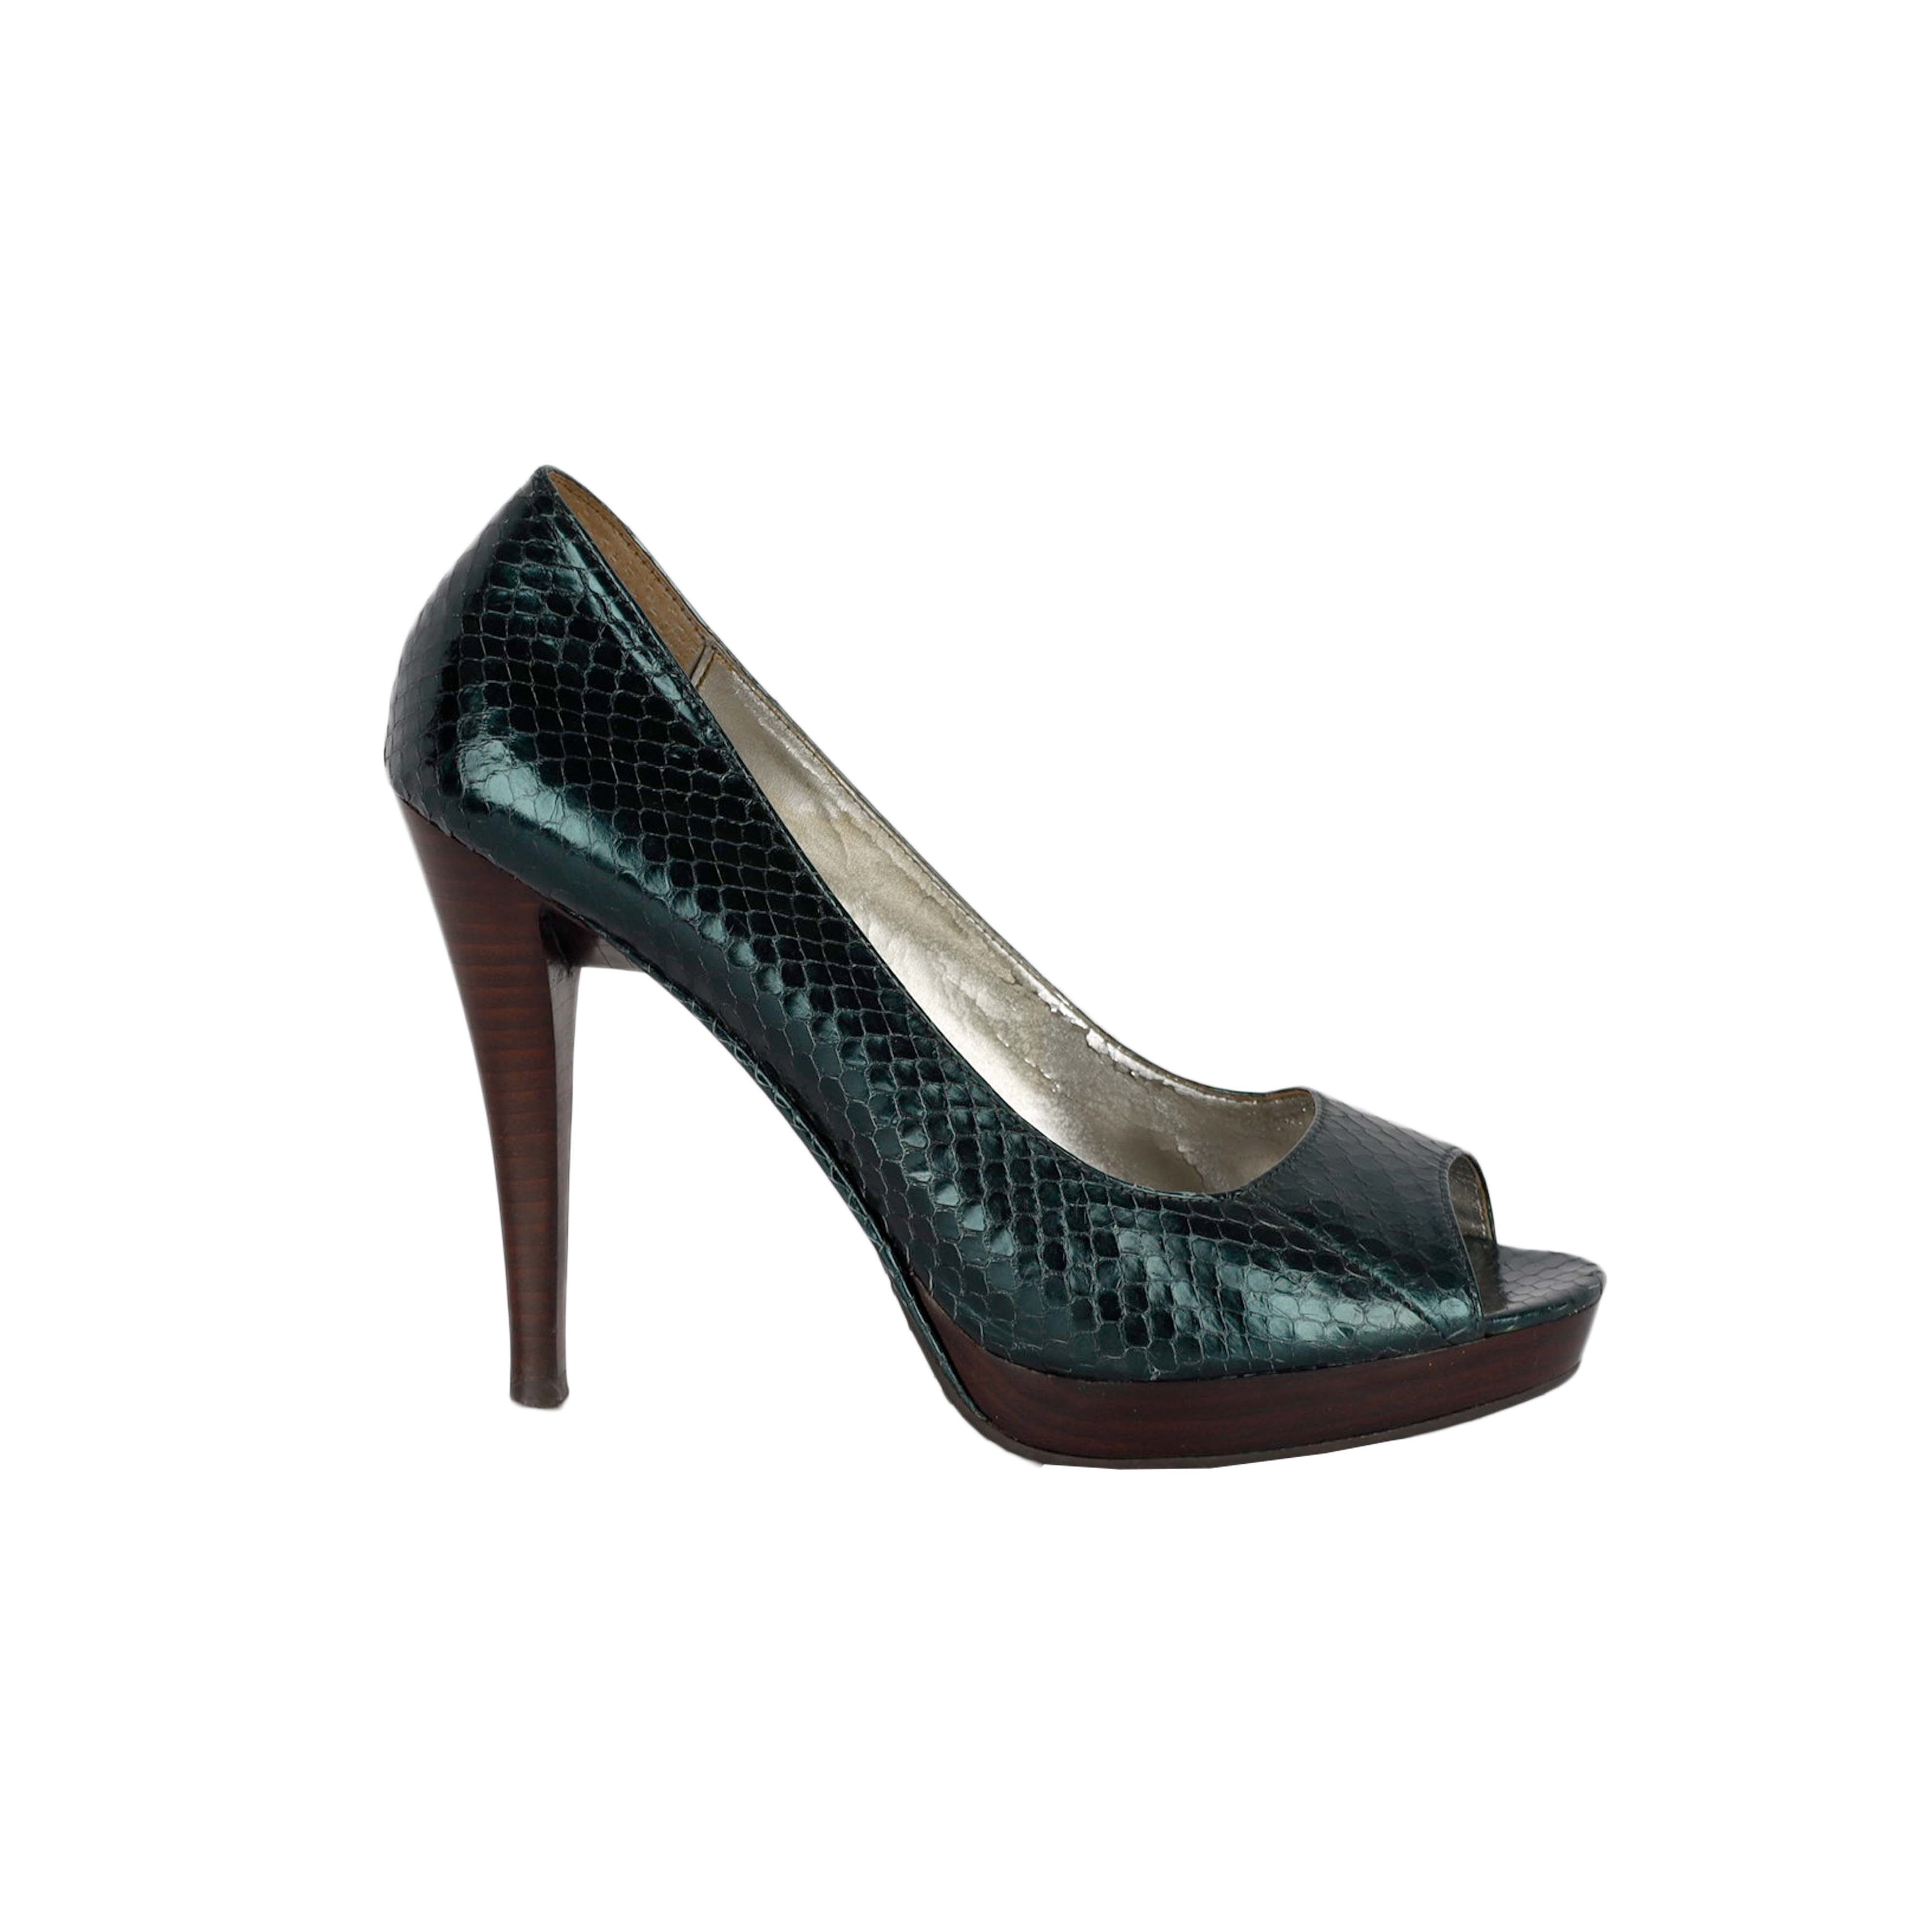 genoeg Zwitsers hoed Calvin Klein Python Peep-Toe Shoes Second-hand